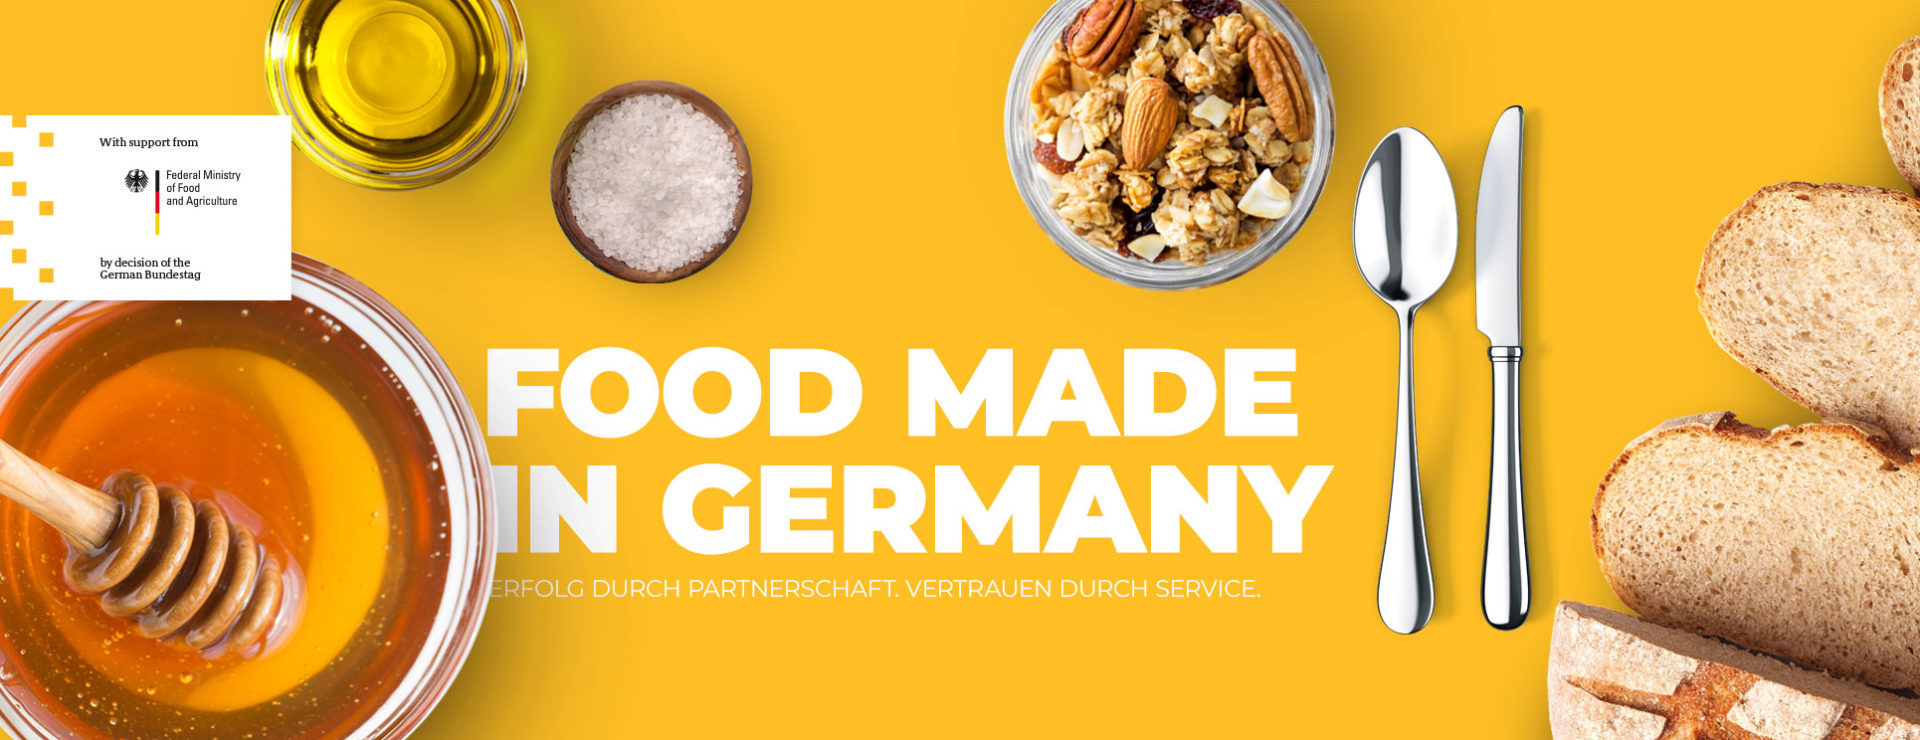 Food Made in Germany - Über uns